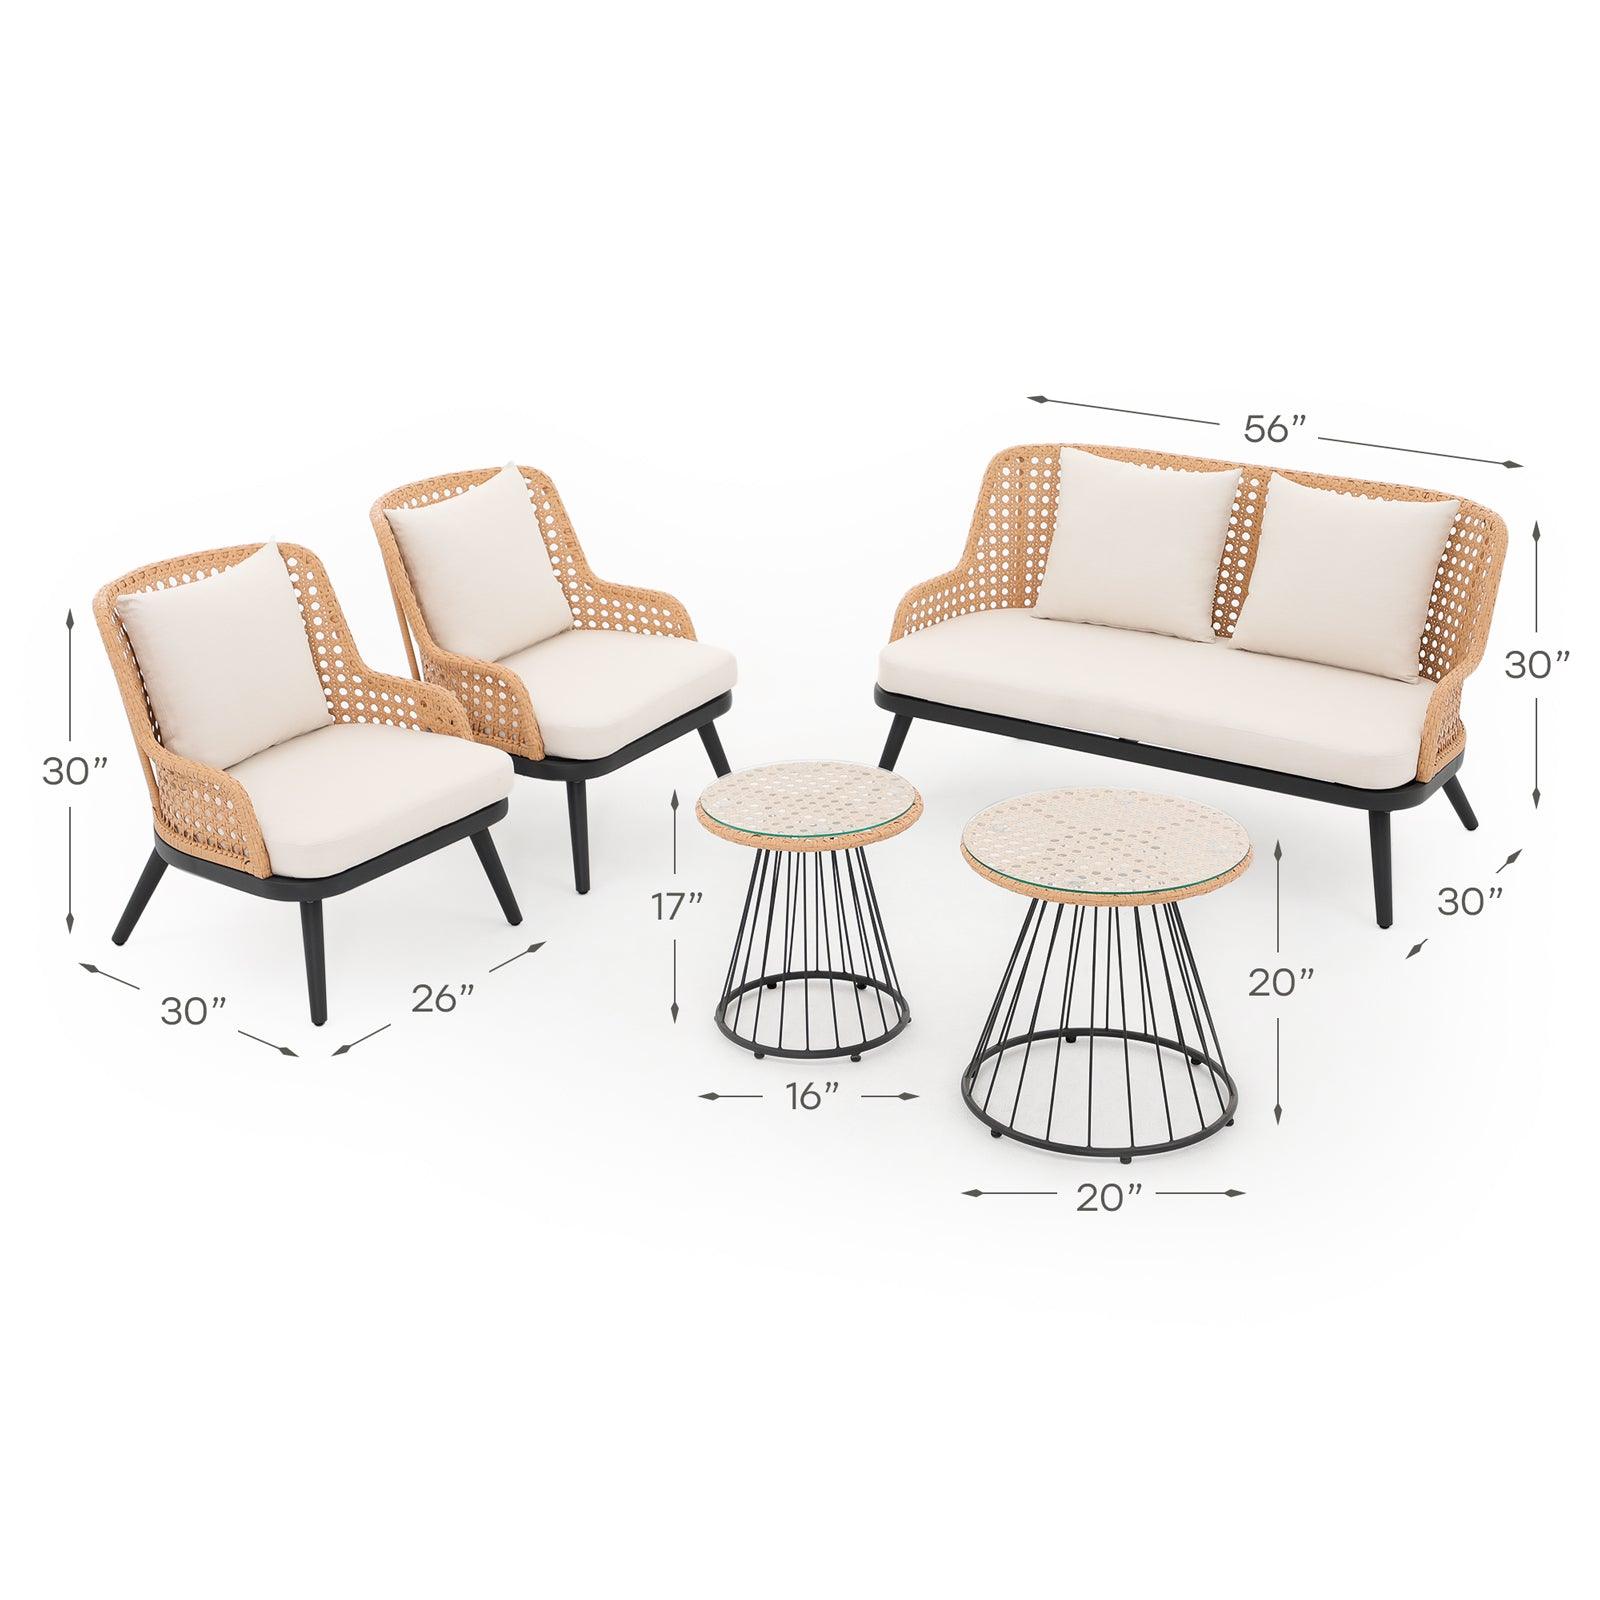 Menorca Outdoor Seating Set, One Loveseat, Two Lounge Chair, Two Coffee Tables, Yellow Wicker, White Cushions, Dimension Information -Jardina Furniture